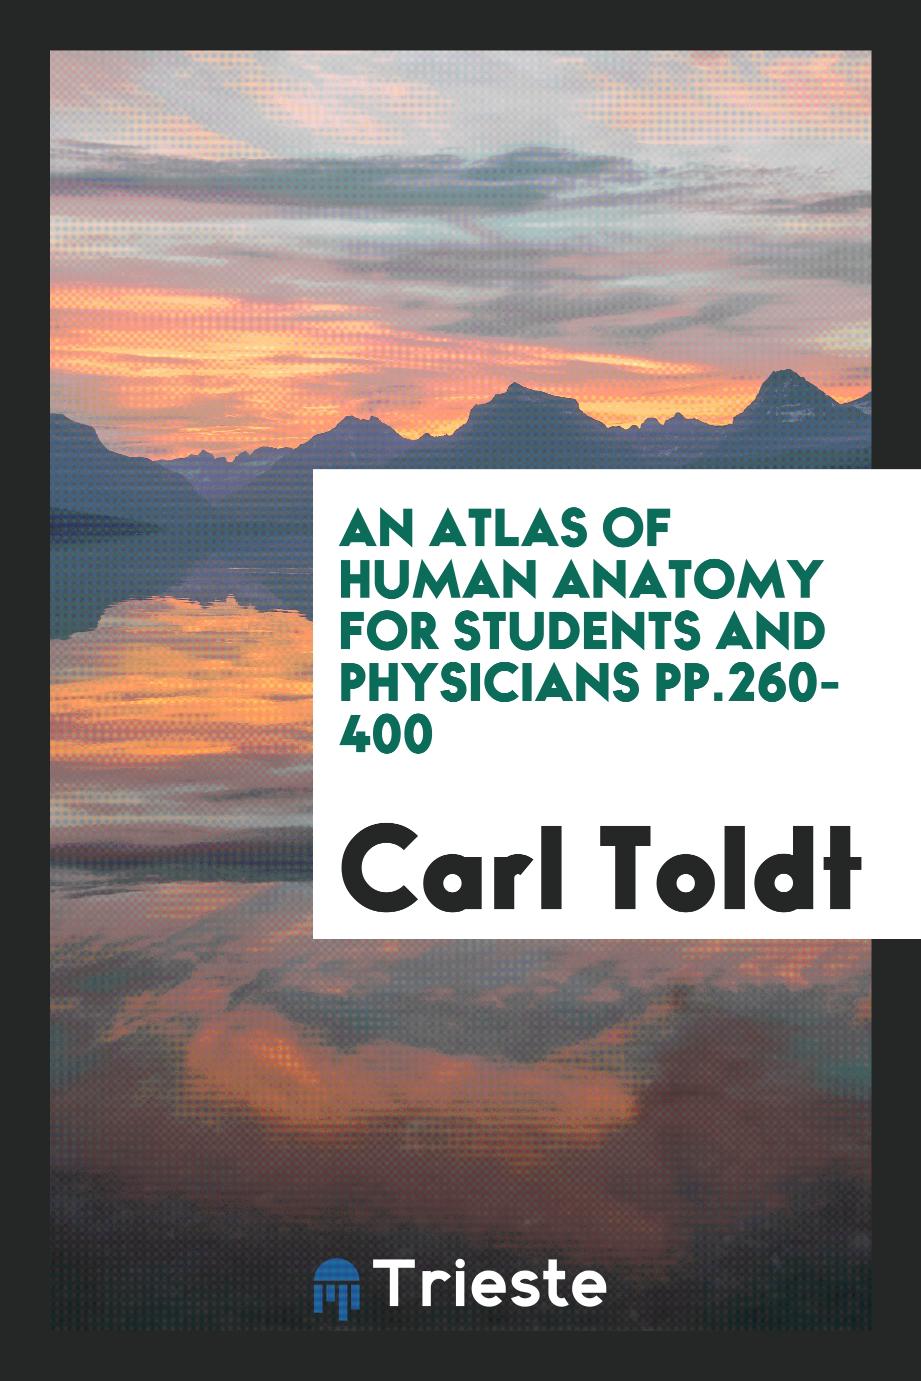 An Atlas of Human Anatomy for Students and Physicians pp.260-400